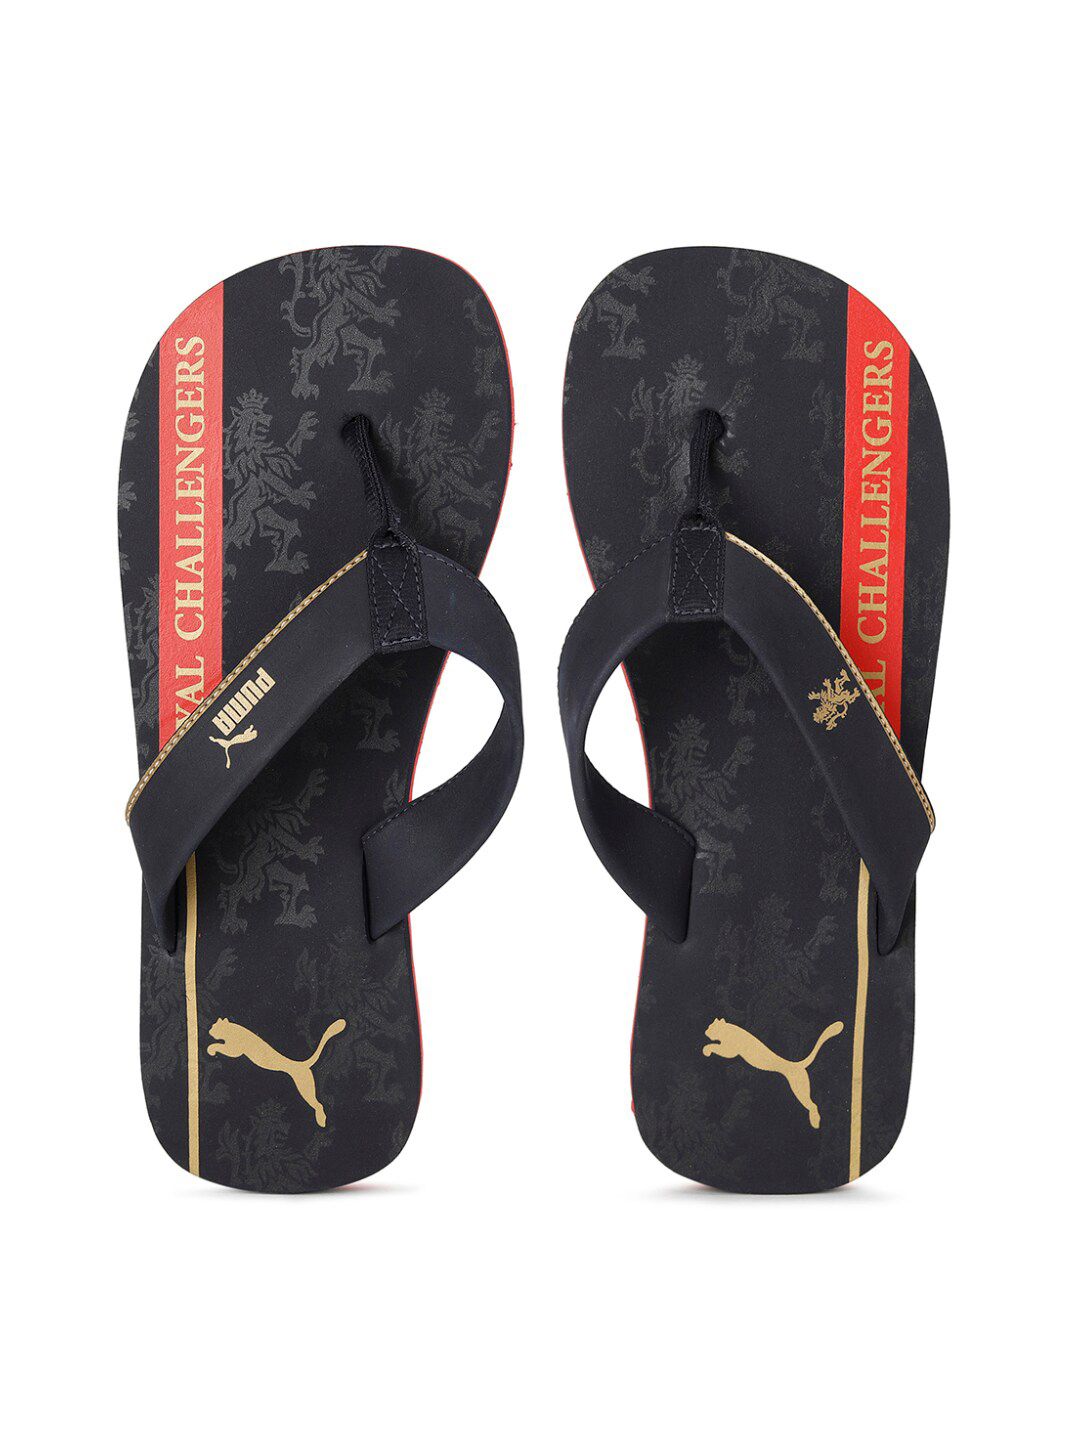 Puma Unisex Blue Royal Challengers Bangalore Rubber Thong Flip-Flops Price in India